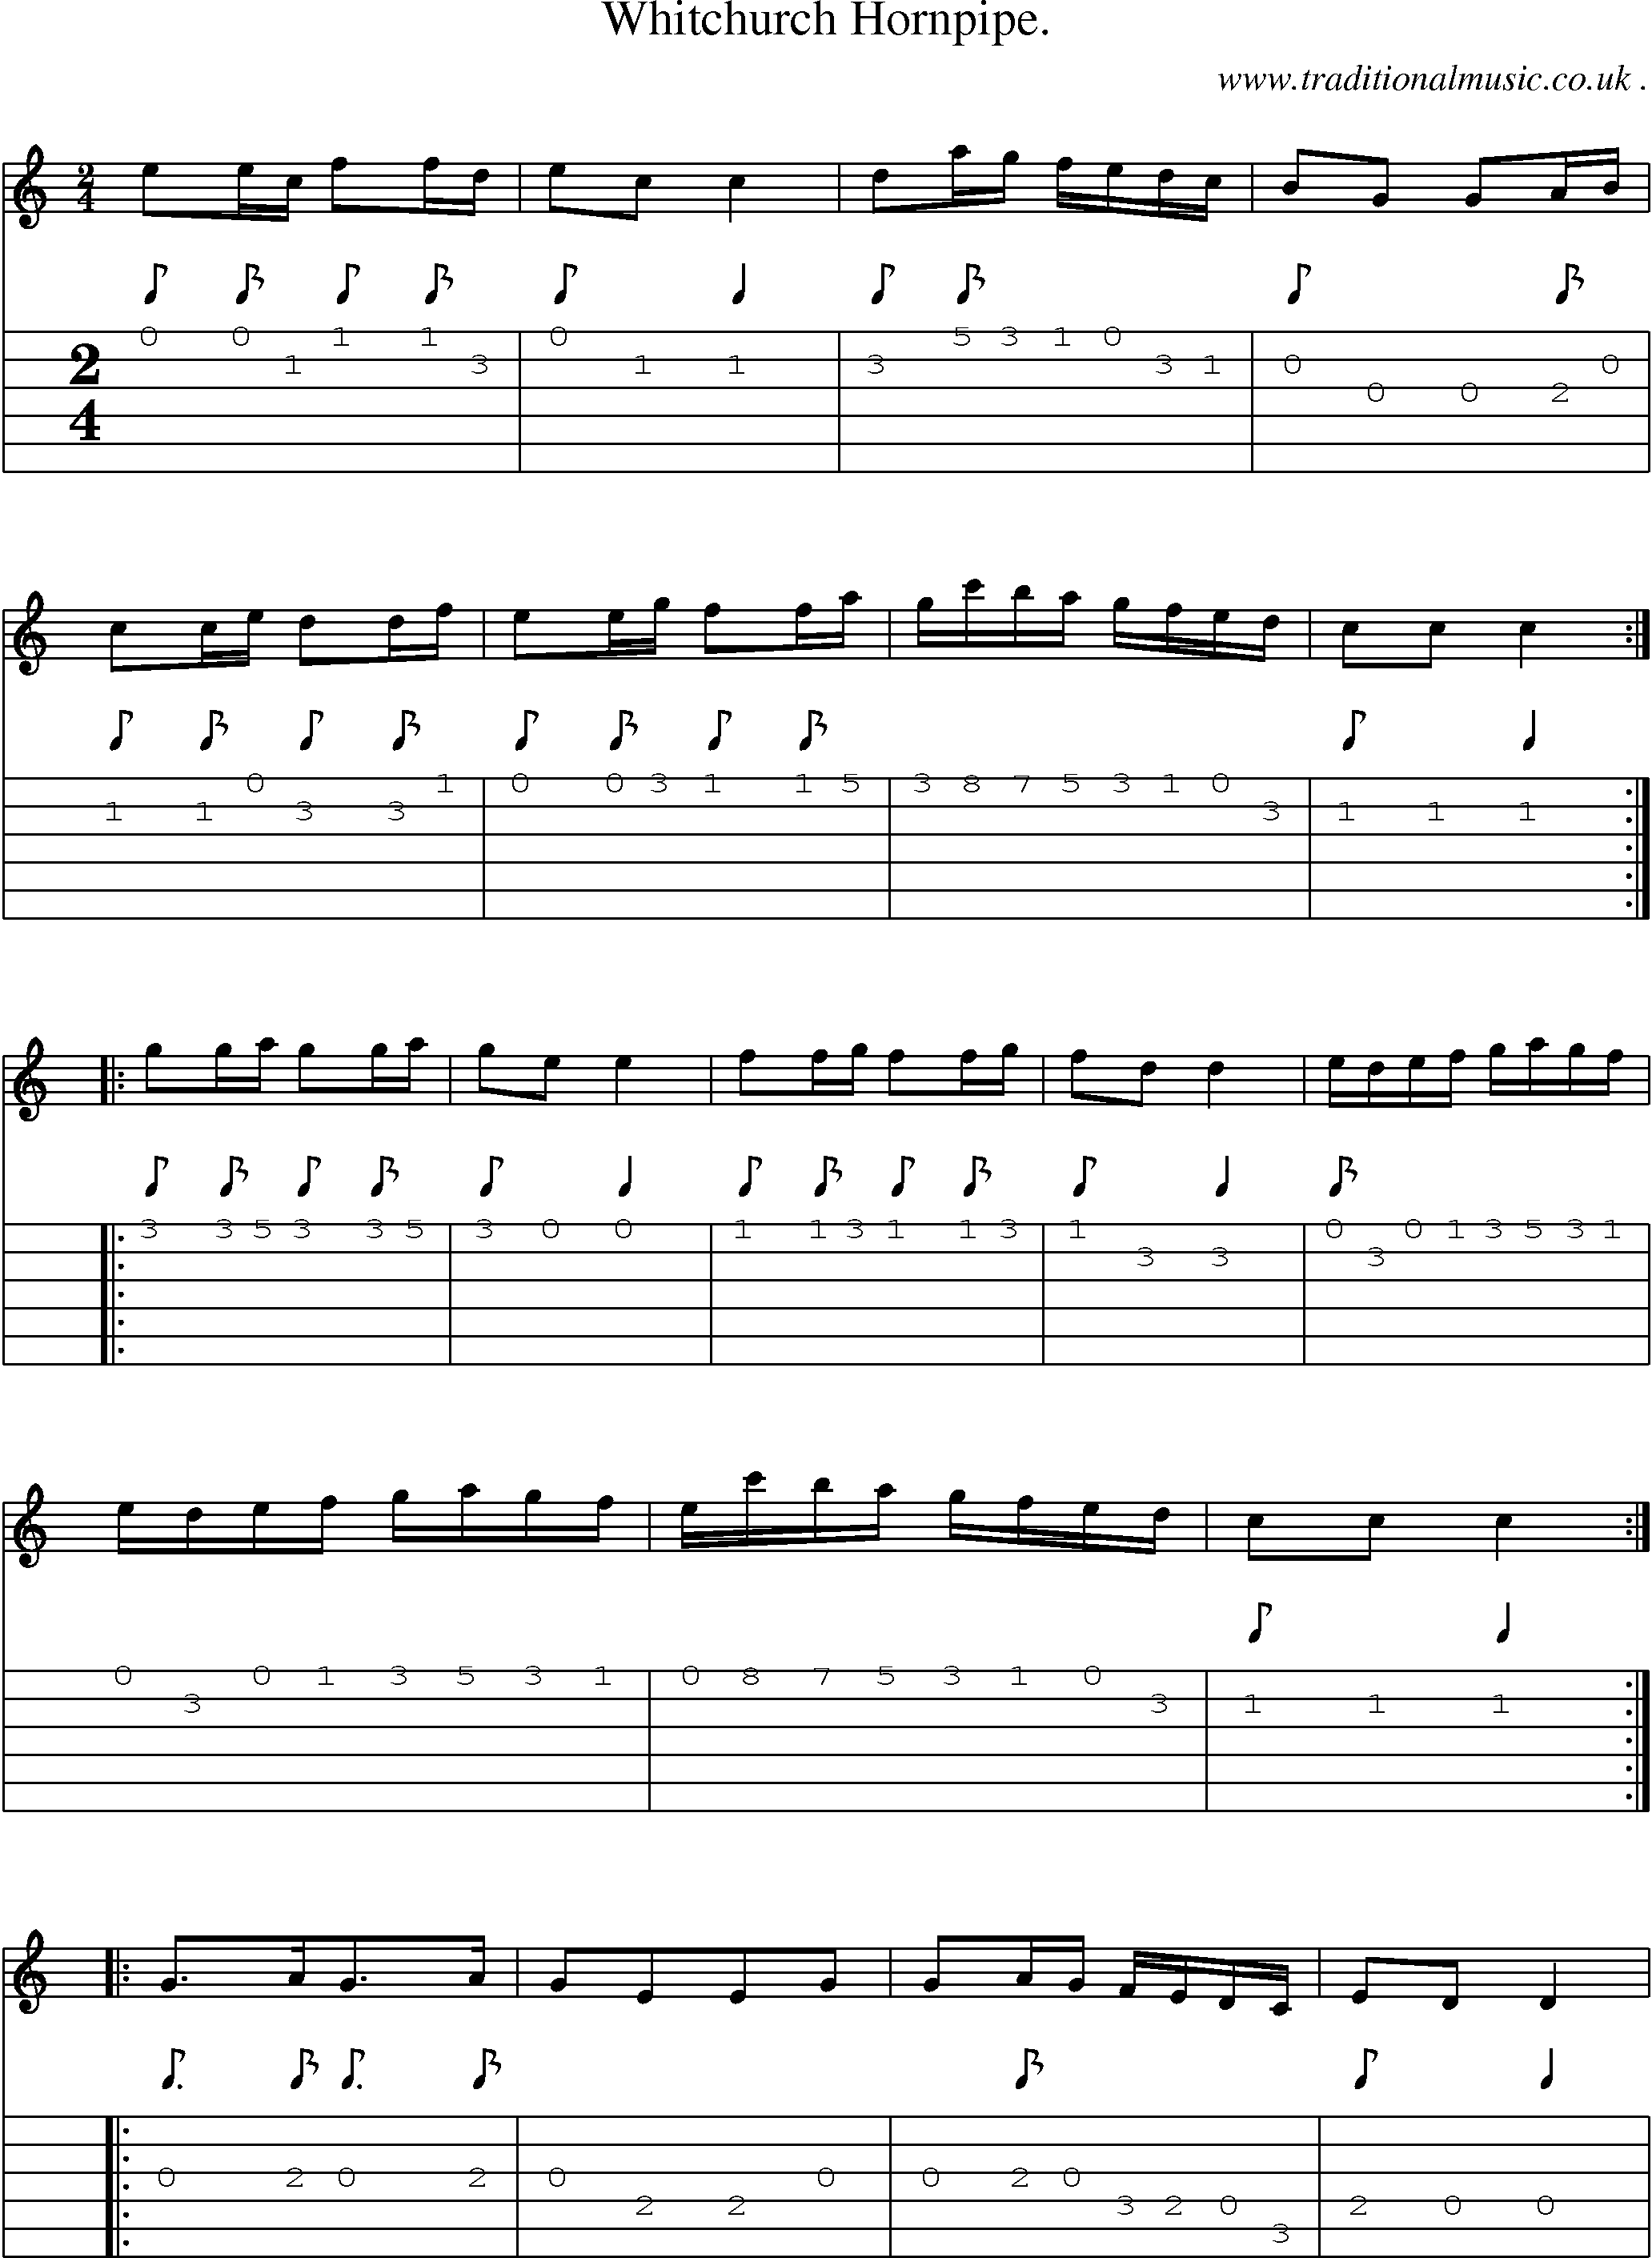 Sheet-Music and Guitar Tabs for Whitchurch Hornpipe